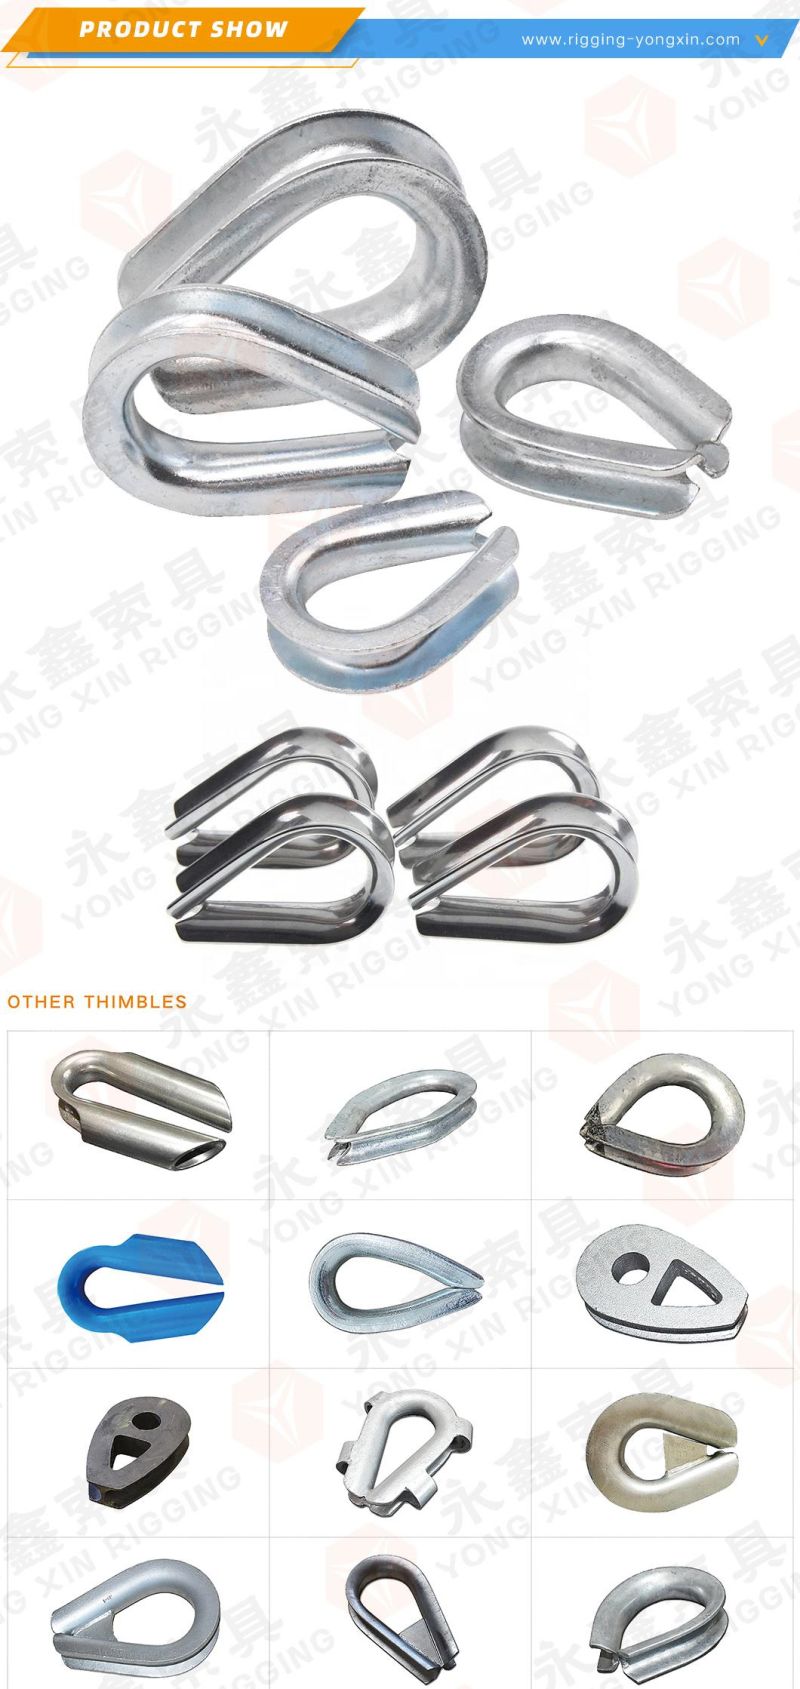 AISI304/316 Stainless Steel Cable Thimble European Standard High Polished Wire Rope Thimble